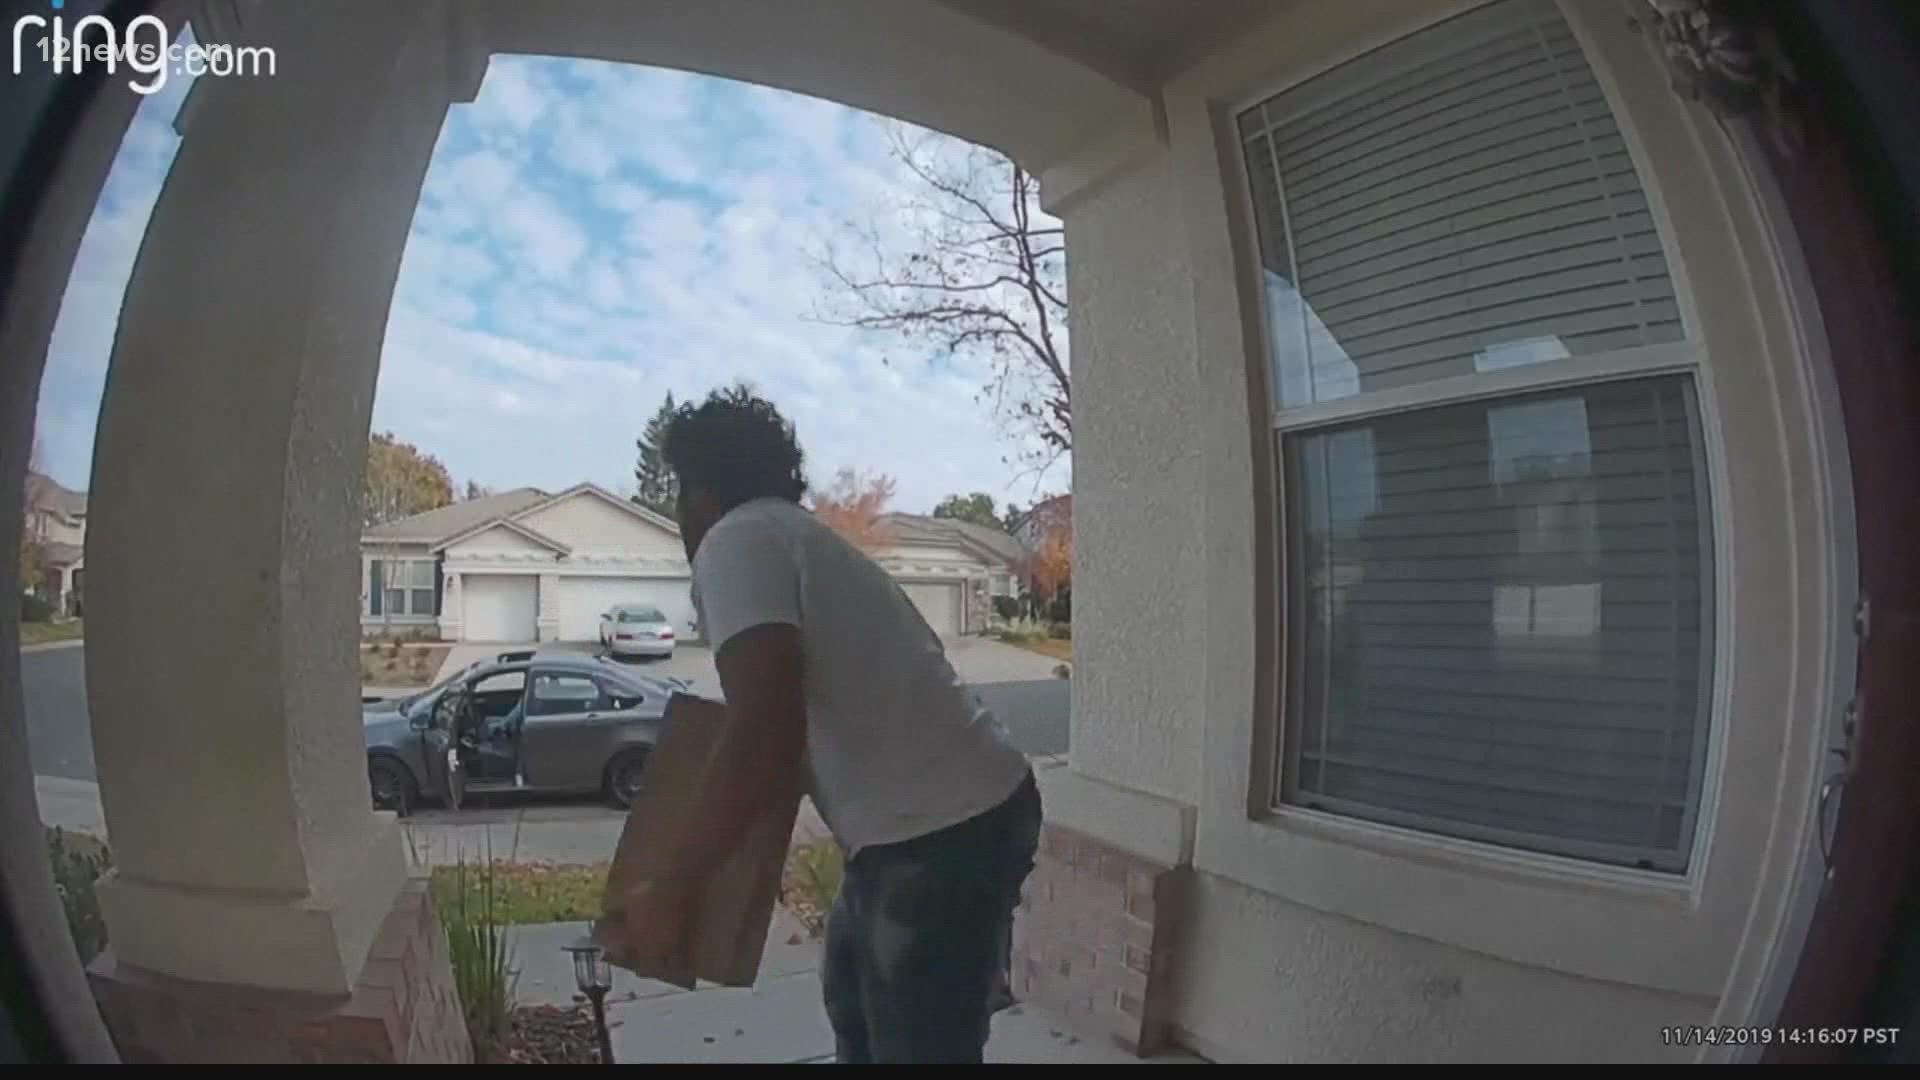 A new report reveals that Arizona is among the states with the most porch pirate thefts.